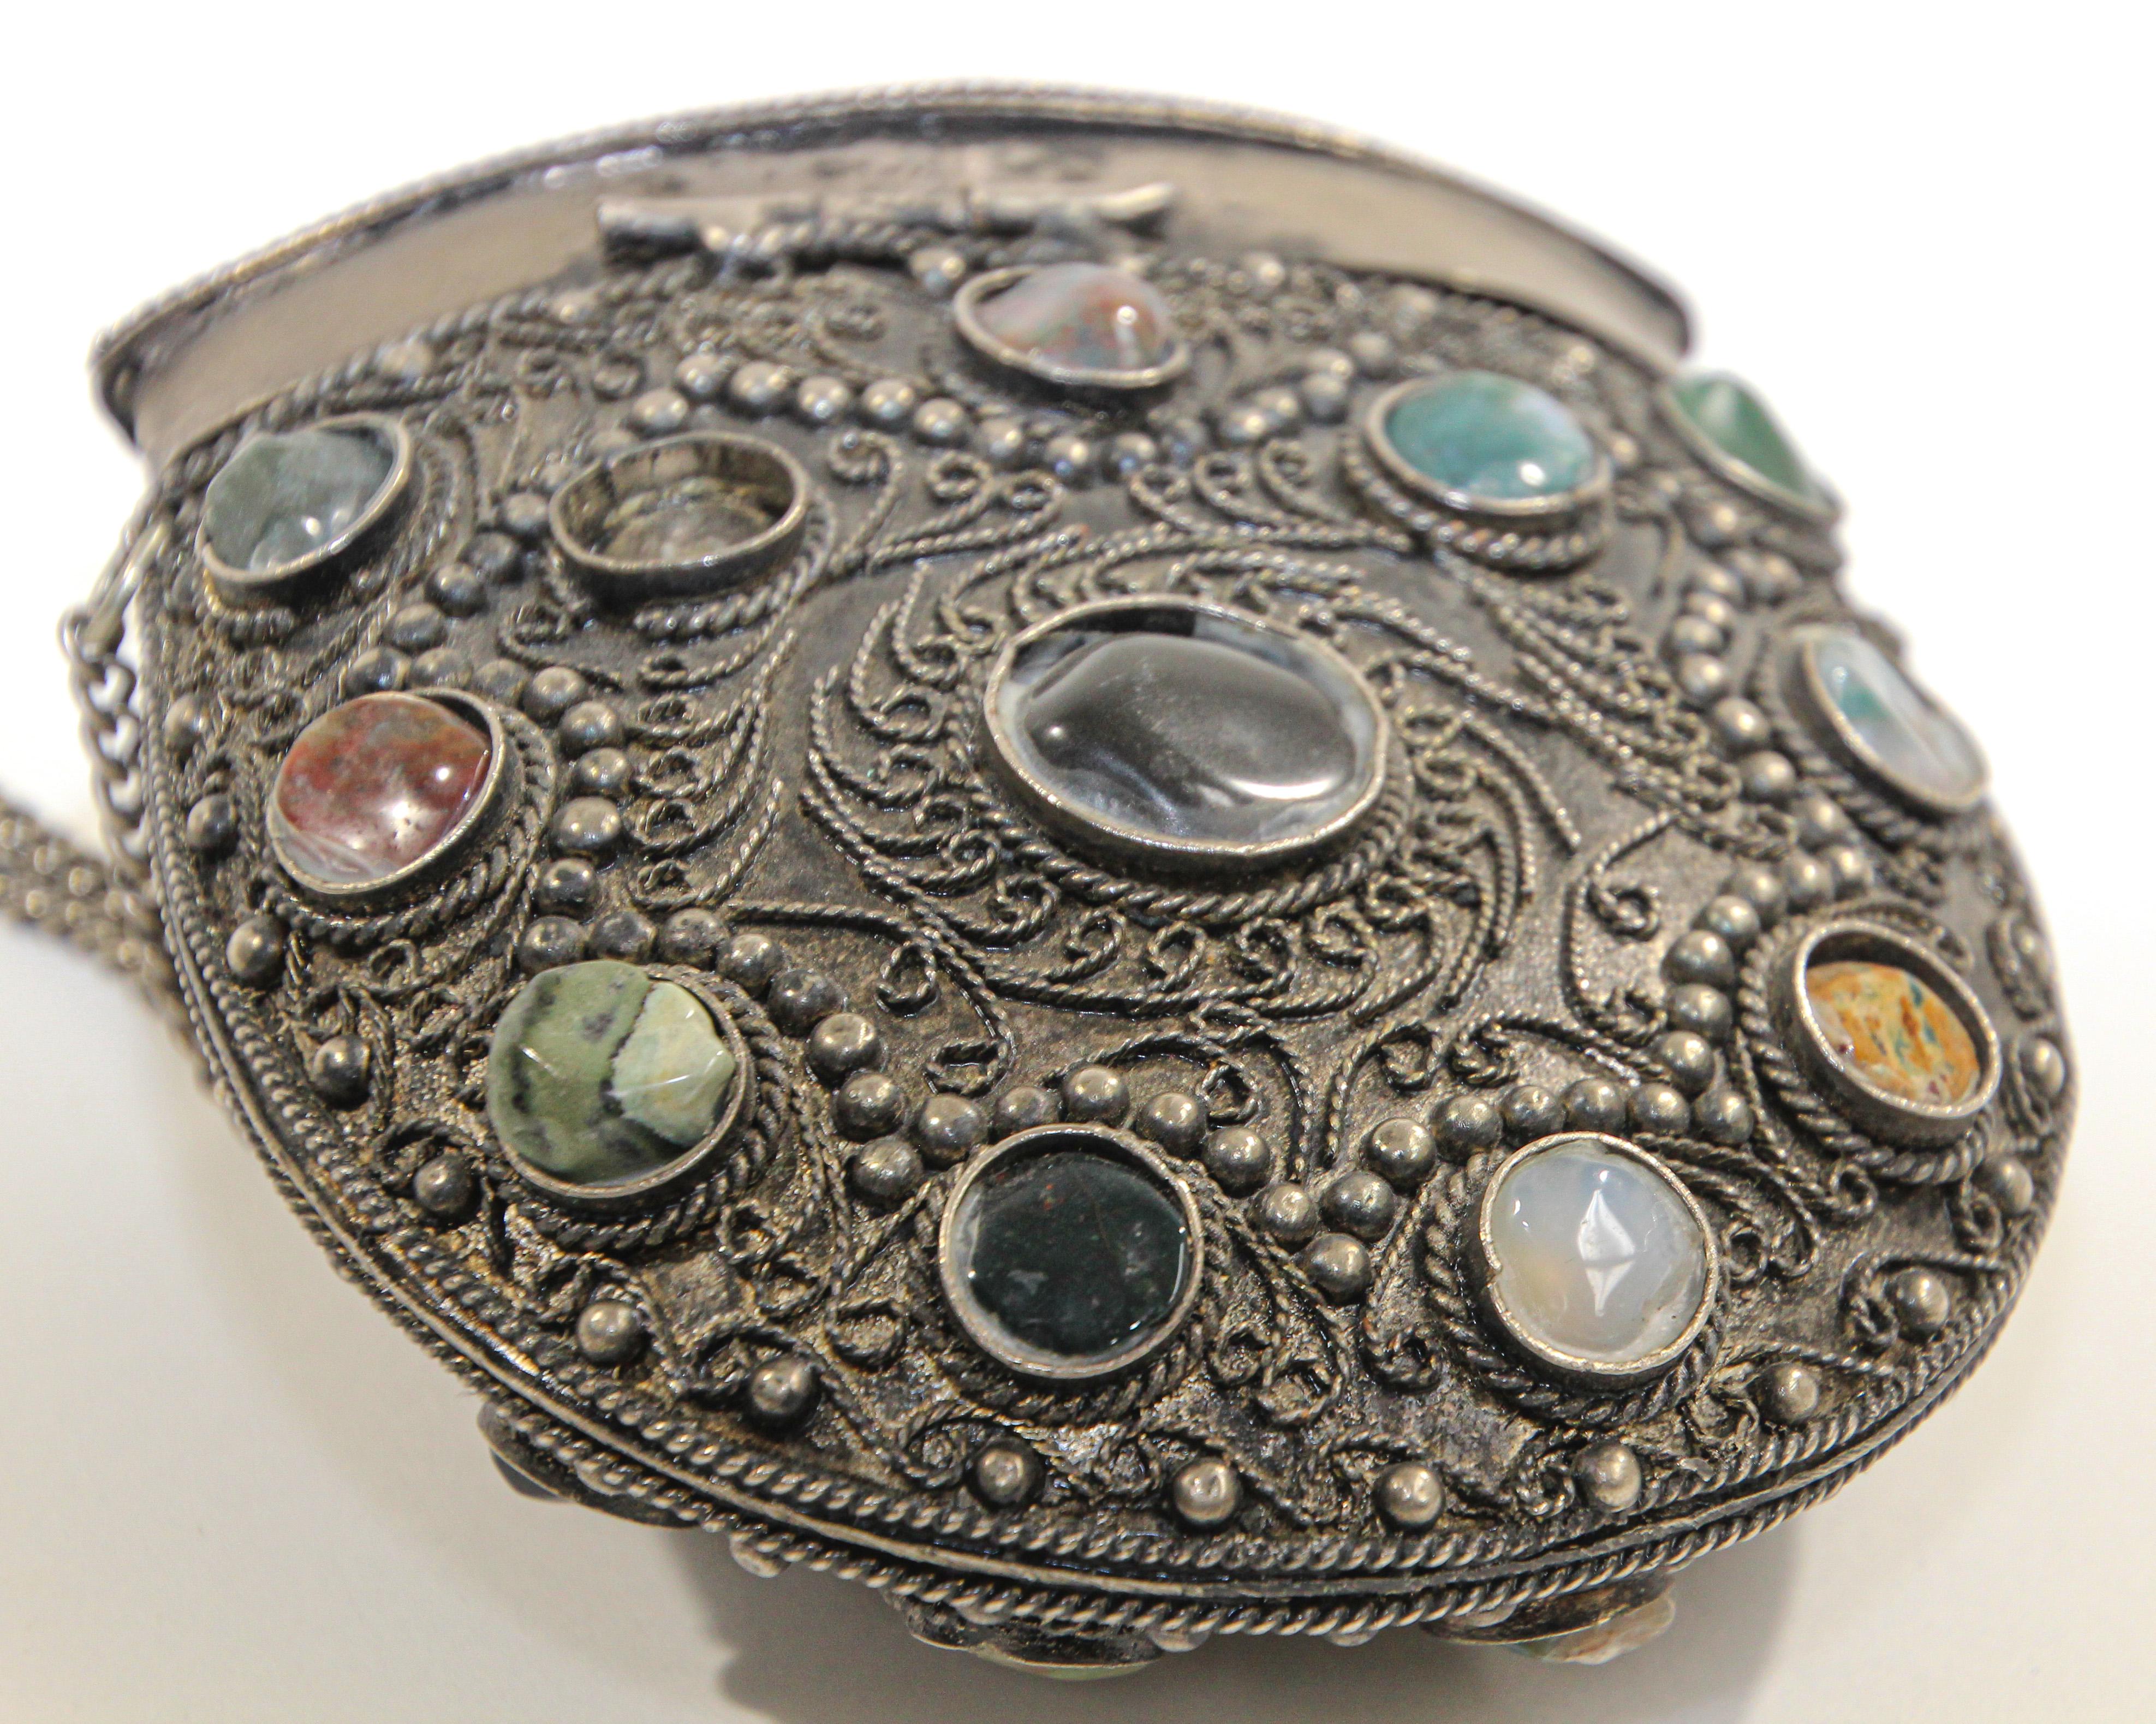 Vintage Sajai Metal and Agate Scroll Box Coin Purse, Handmade in India In Good Condition For Sale In North Hollywood, CA